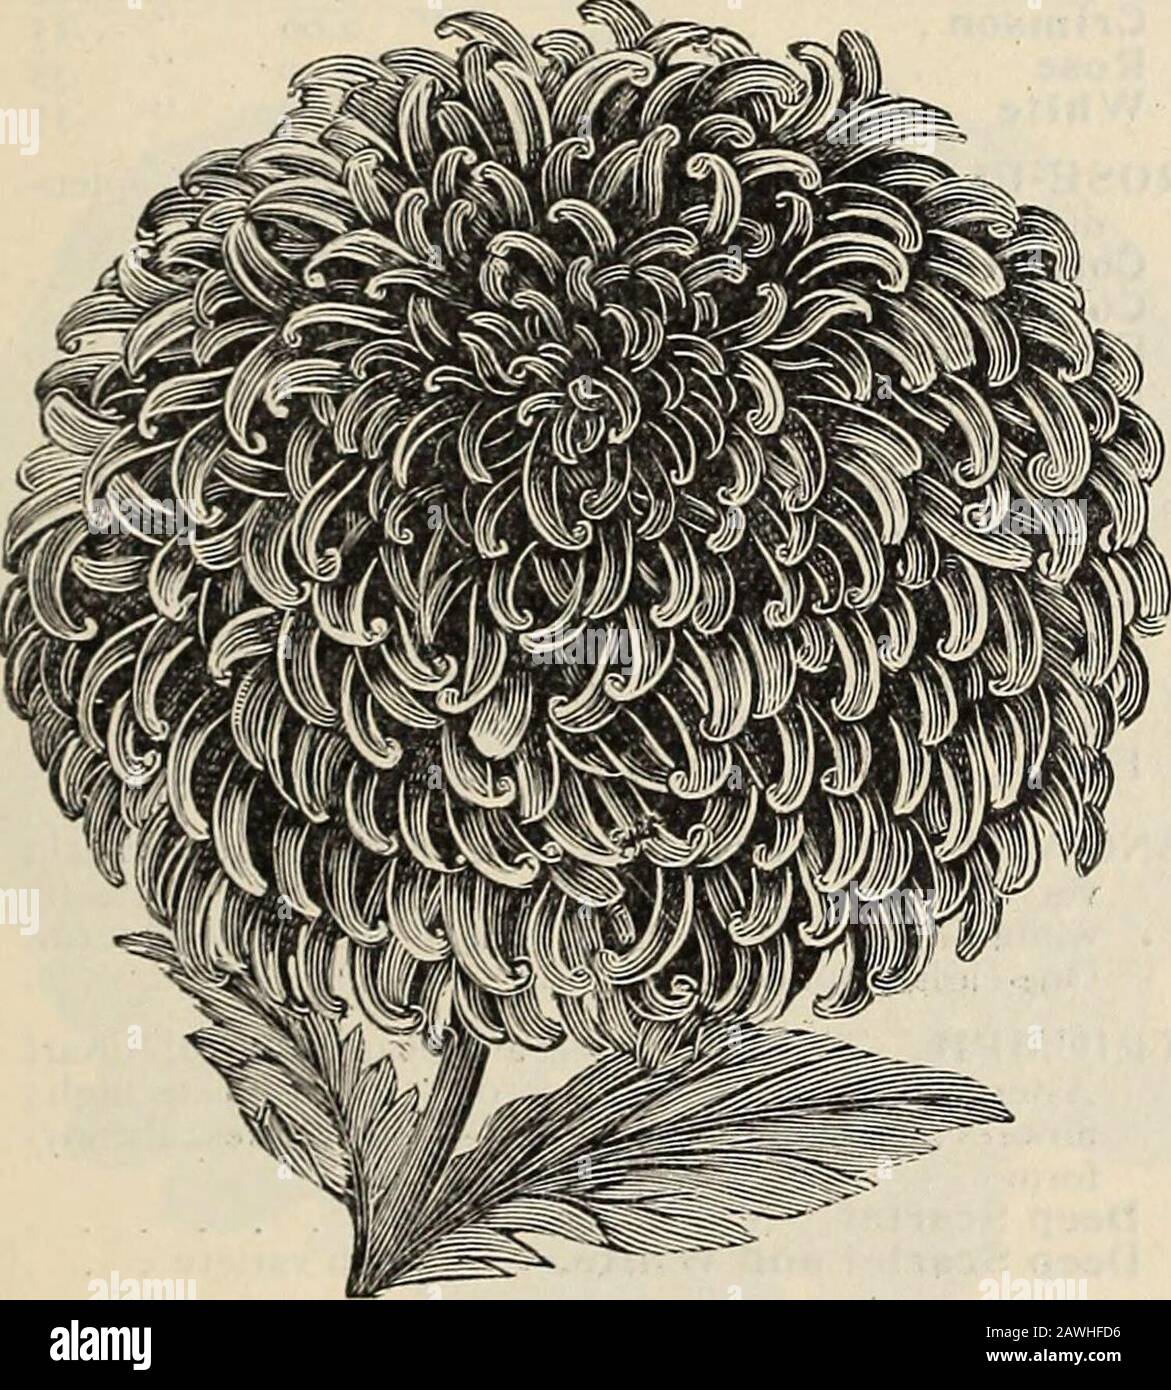 R& JFarquhar and Co'scatalogue, 1897 : reliable tested seeds plants, bulbs fertilizers tools, etc. . mbing peren-nial; foliage large and beautiful. Thirty feet . . .10 625 ARMERIA Formosa. (Thrift, or Sea Pink.) A low perennial plant with beautiful, dark-crimson flowers 05 630 — Maritima Splendens. Dark rose. One foot . .05 635 ARNEBIA Cornuta. Half-hardy annual ; yellow and maroon. One foot 20 640 ARTEMISIA Gracilis. Omamental-foliaged hardy annual 05 645 ASCLEPIAS Curassavica. .Showy perennial with brilliant scarlet (lowers ; j^rotect in winter 05 650 Tuberosa. Beautiful orange ; hardy peren Stock Photo